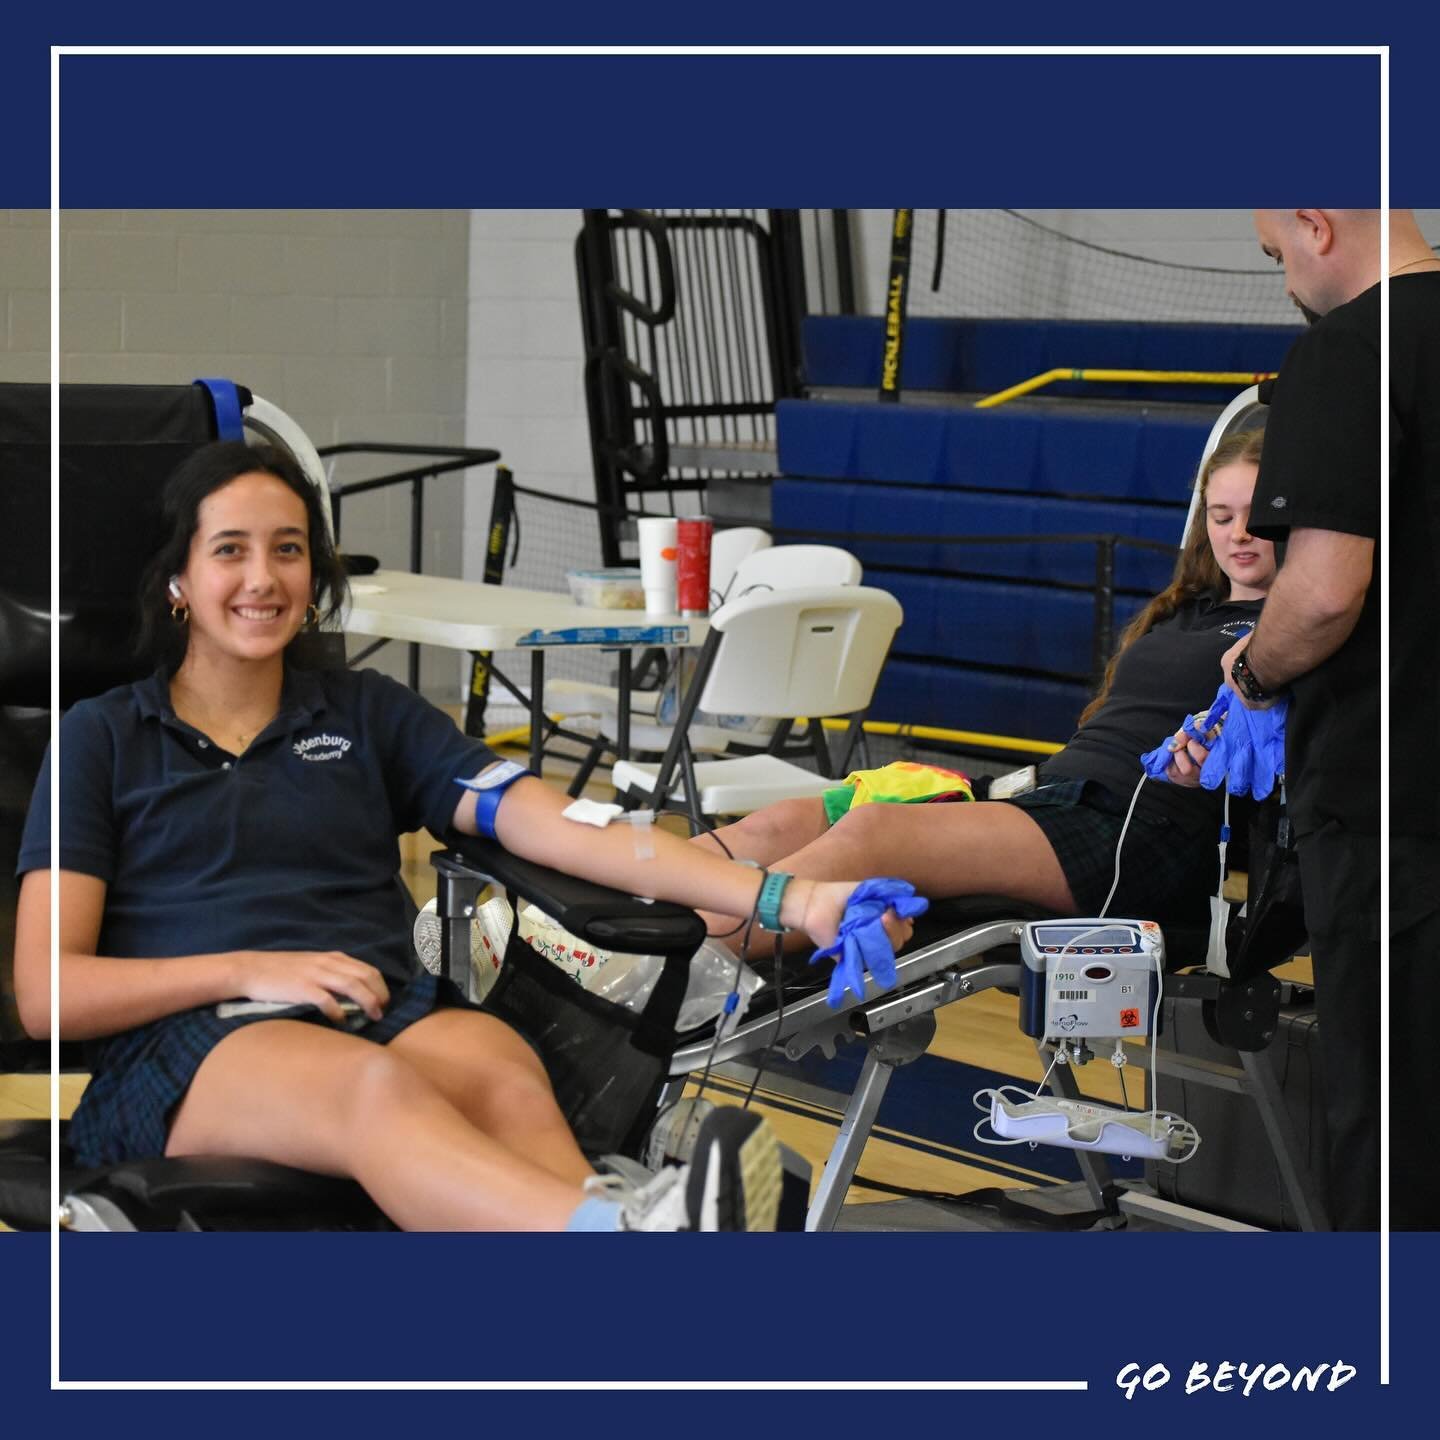 Last week, OA held its annual NHS Blood Drive through the Hoxworth Blood Center. 

Thank you to everyone who donated!